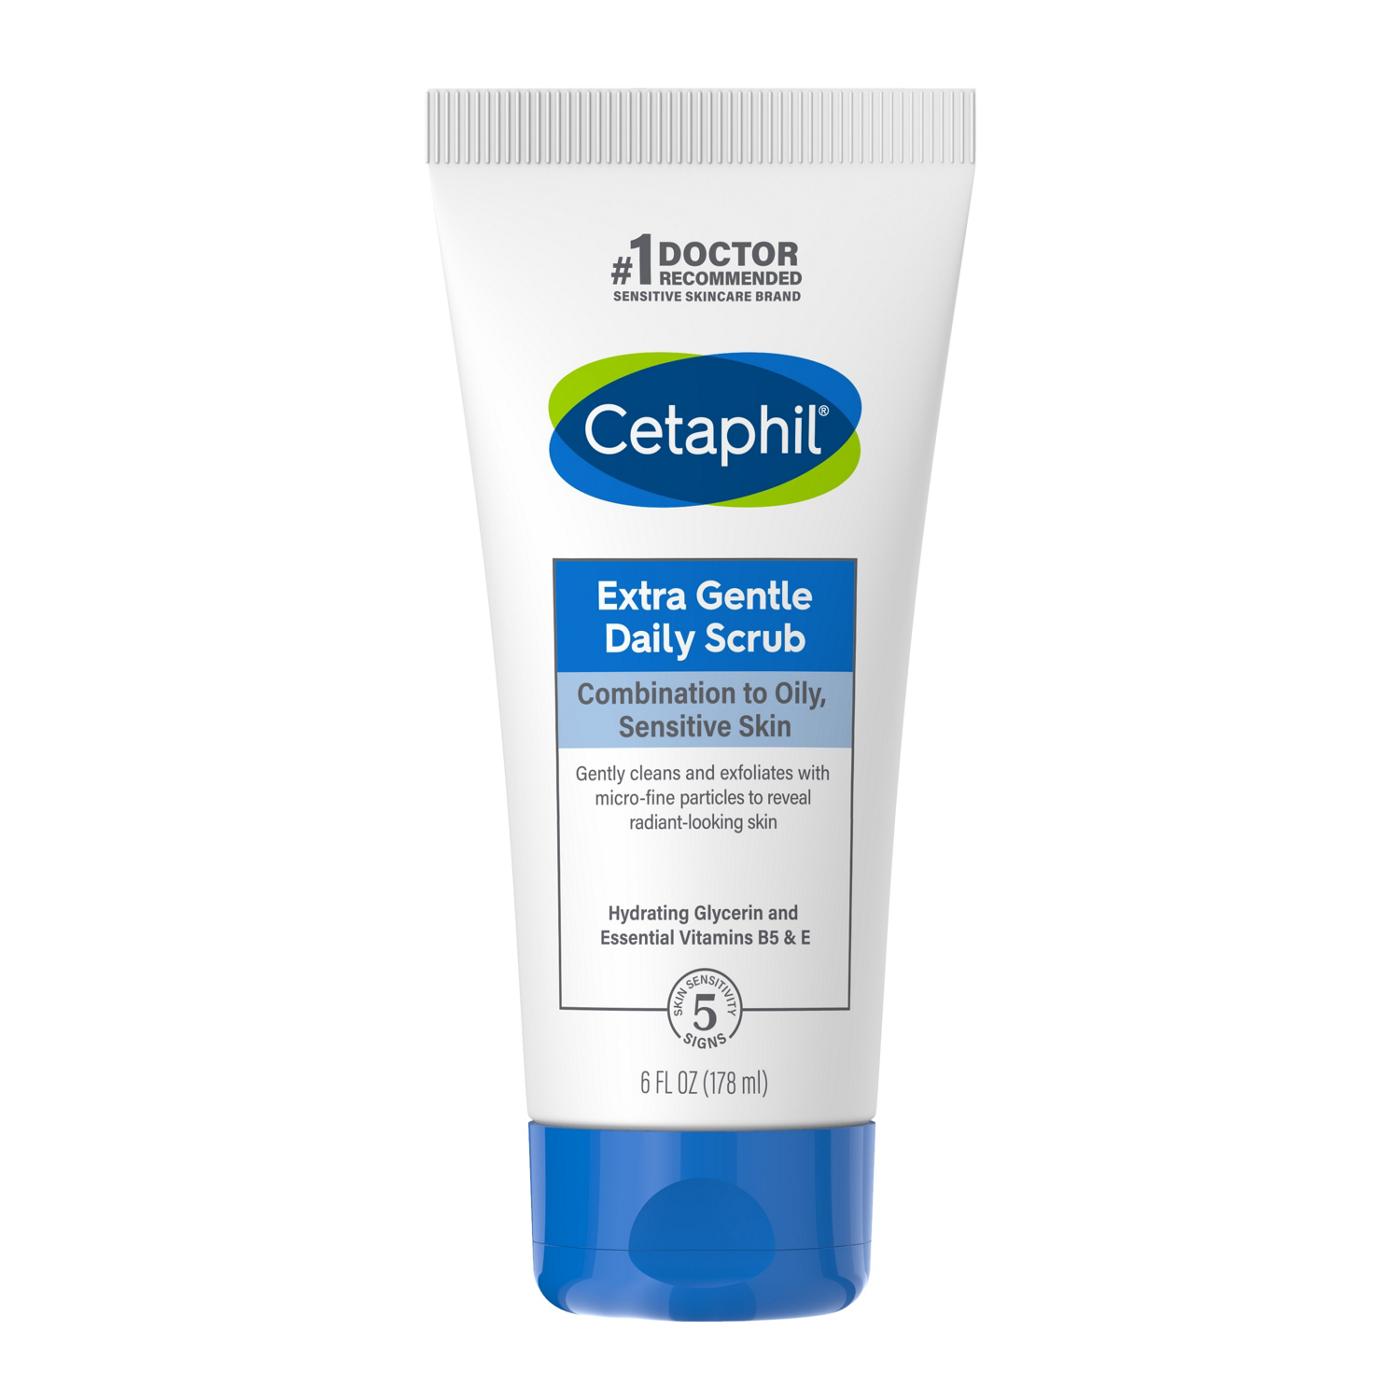 Cetaphil Extra Gentle Daily Scrub; image 1 of 7